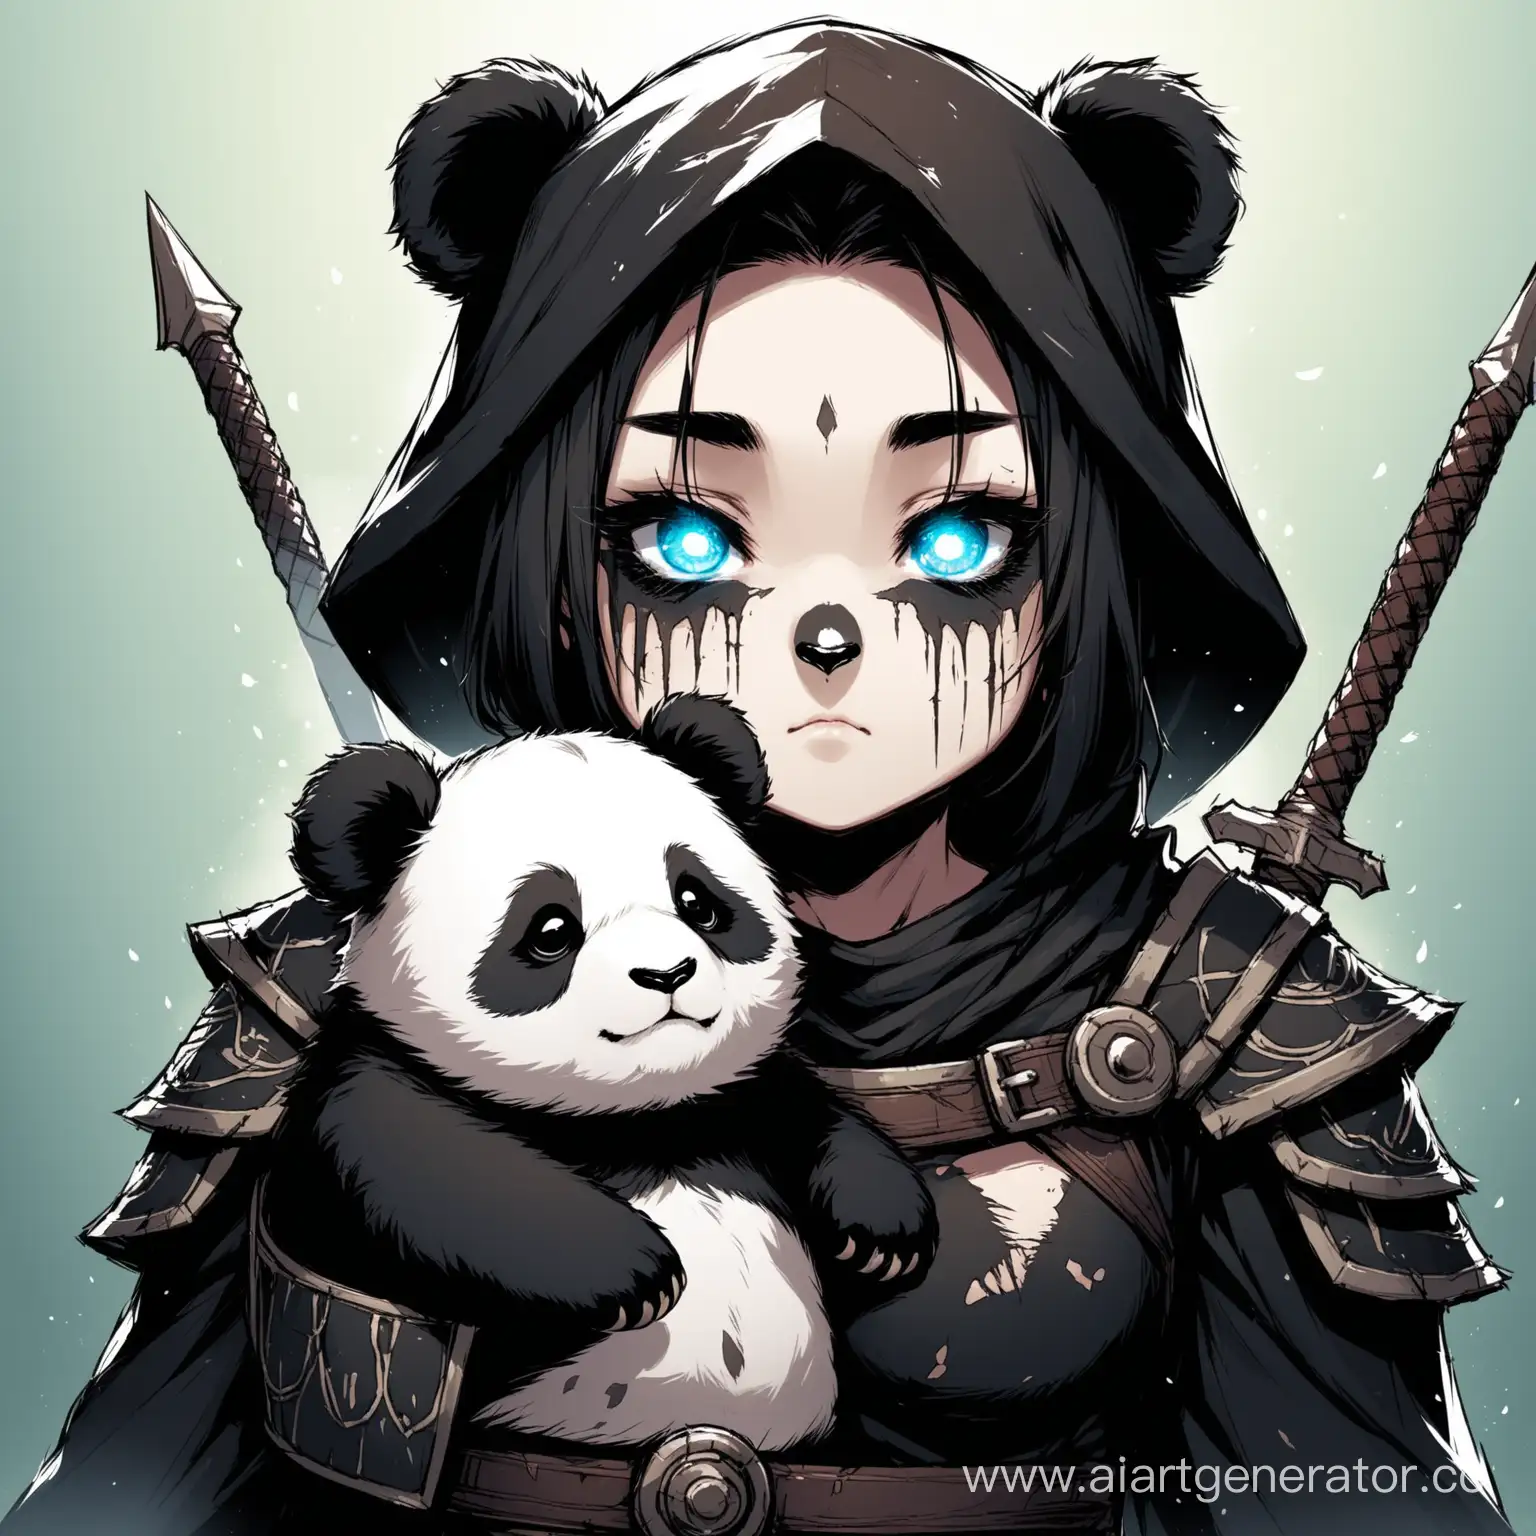 Adorable-Panda-with-Intimidating-Scarred-Warrior